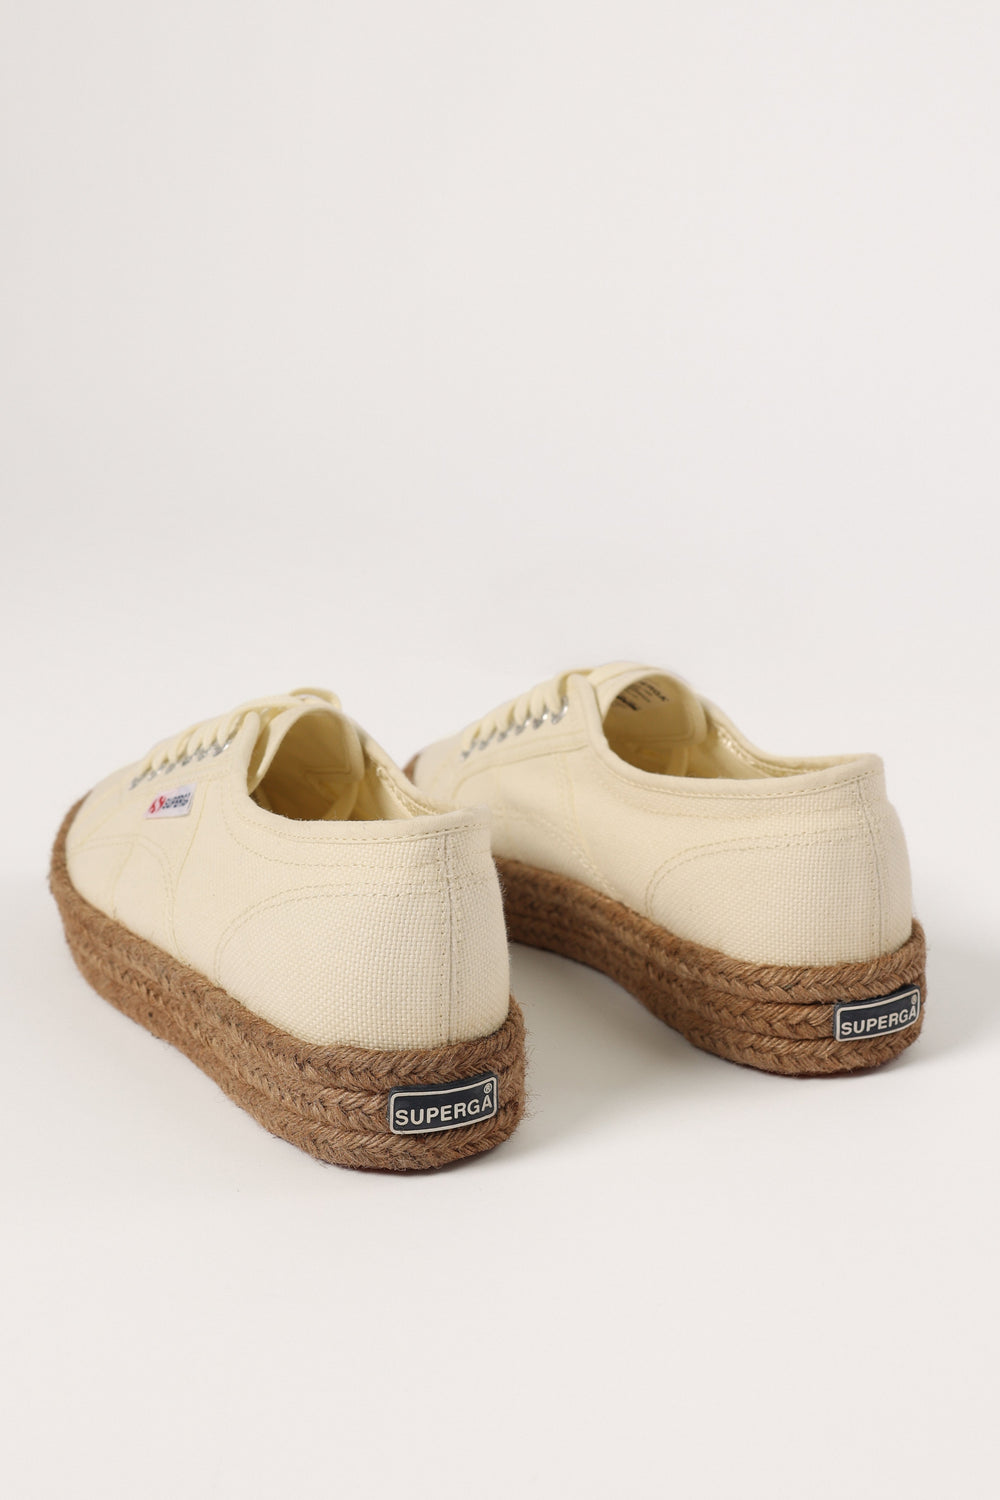 SHOES @2730 Rope - Beige Natural